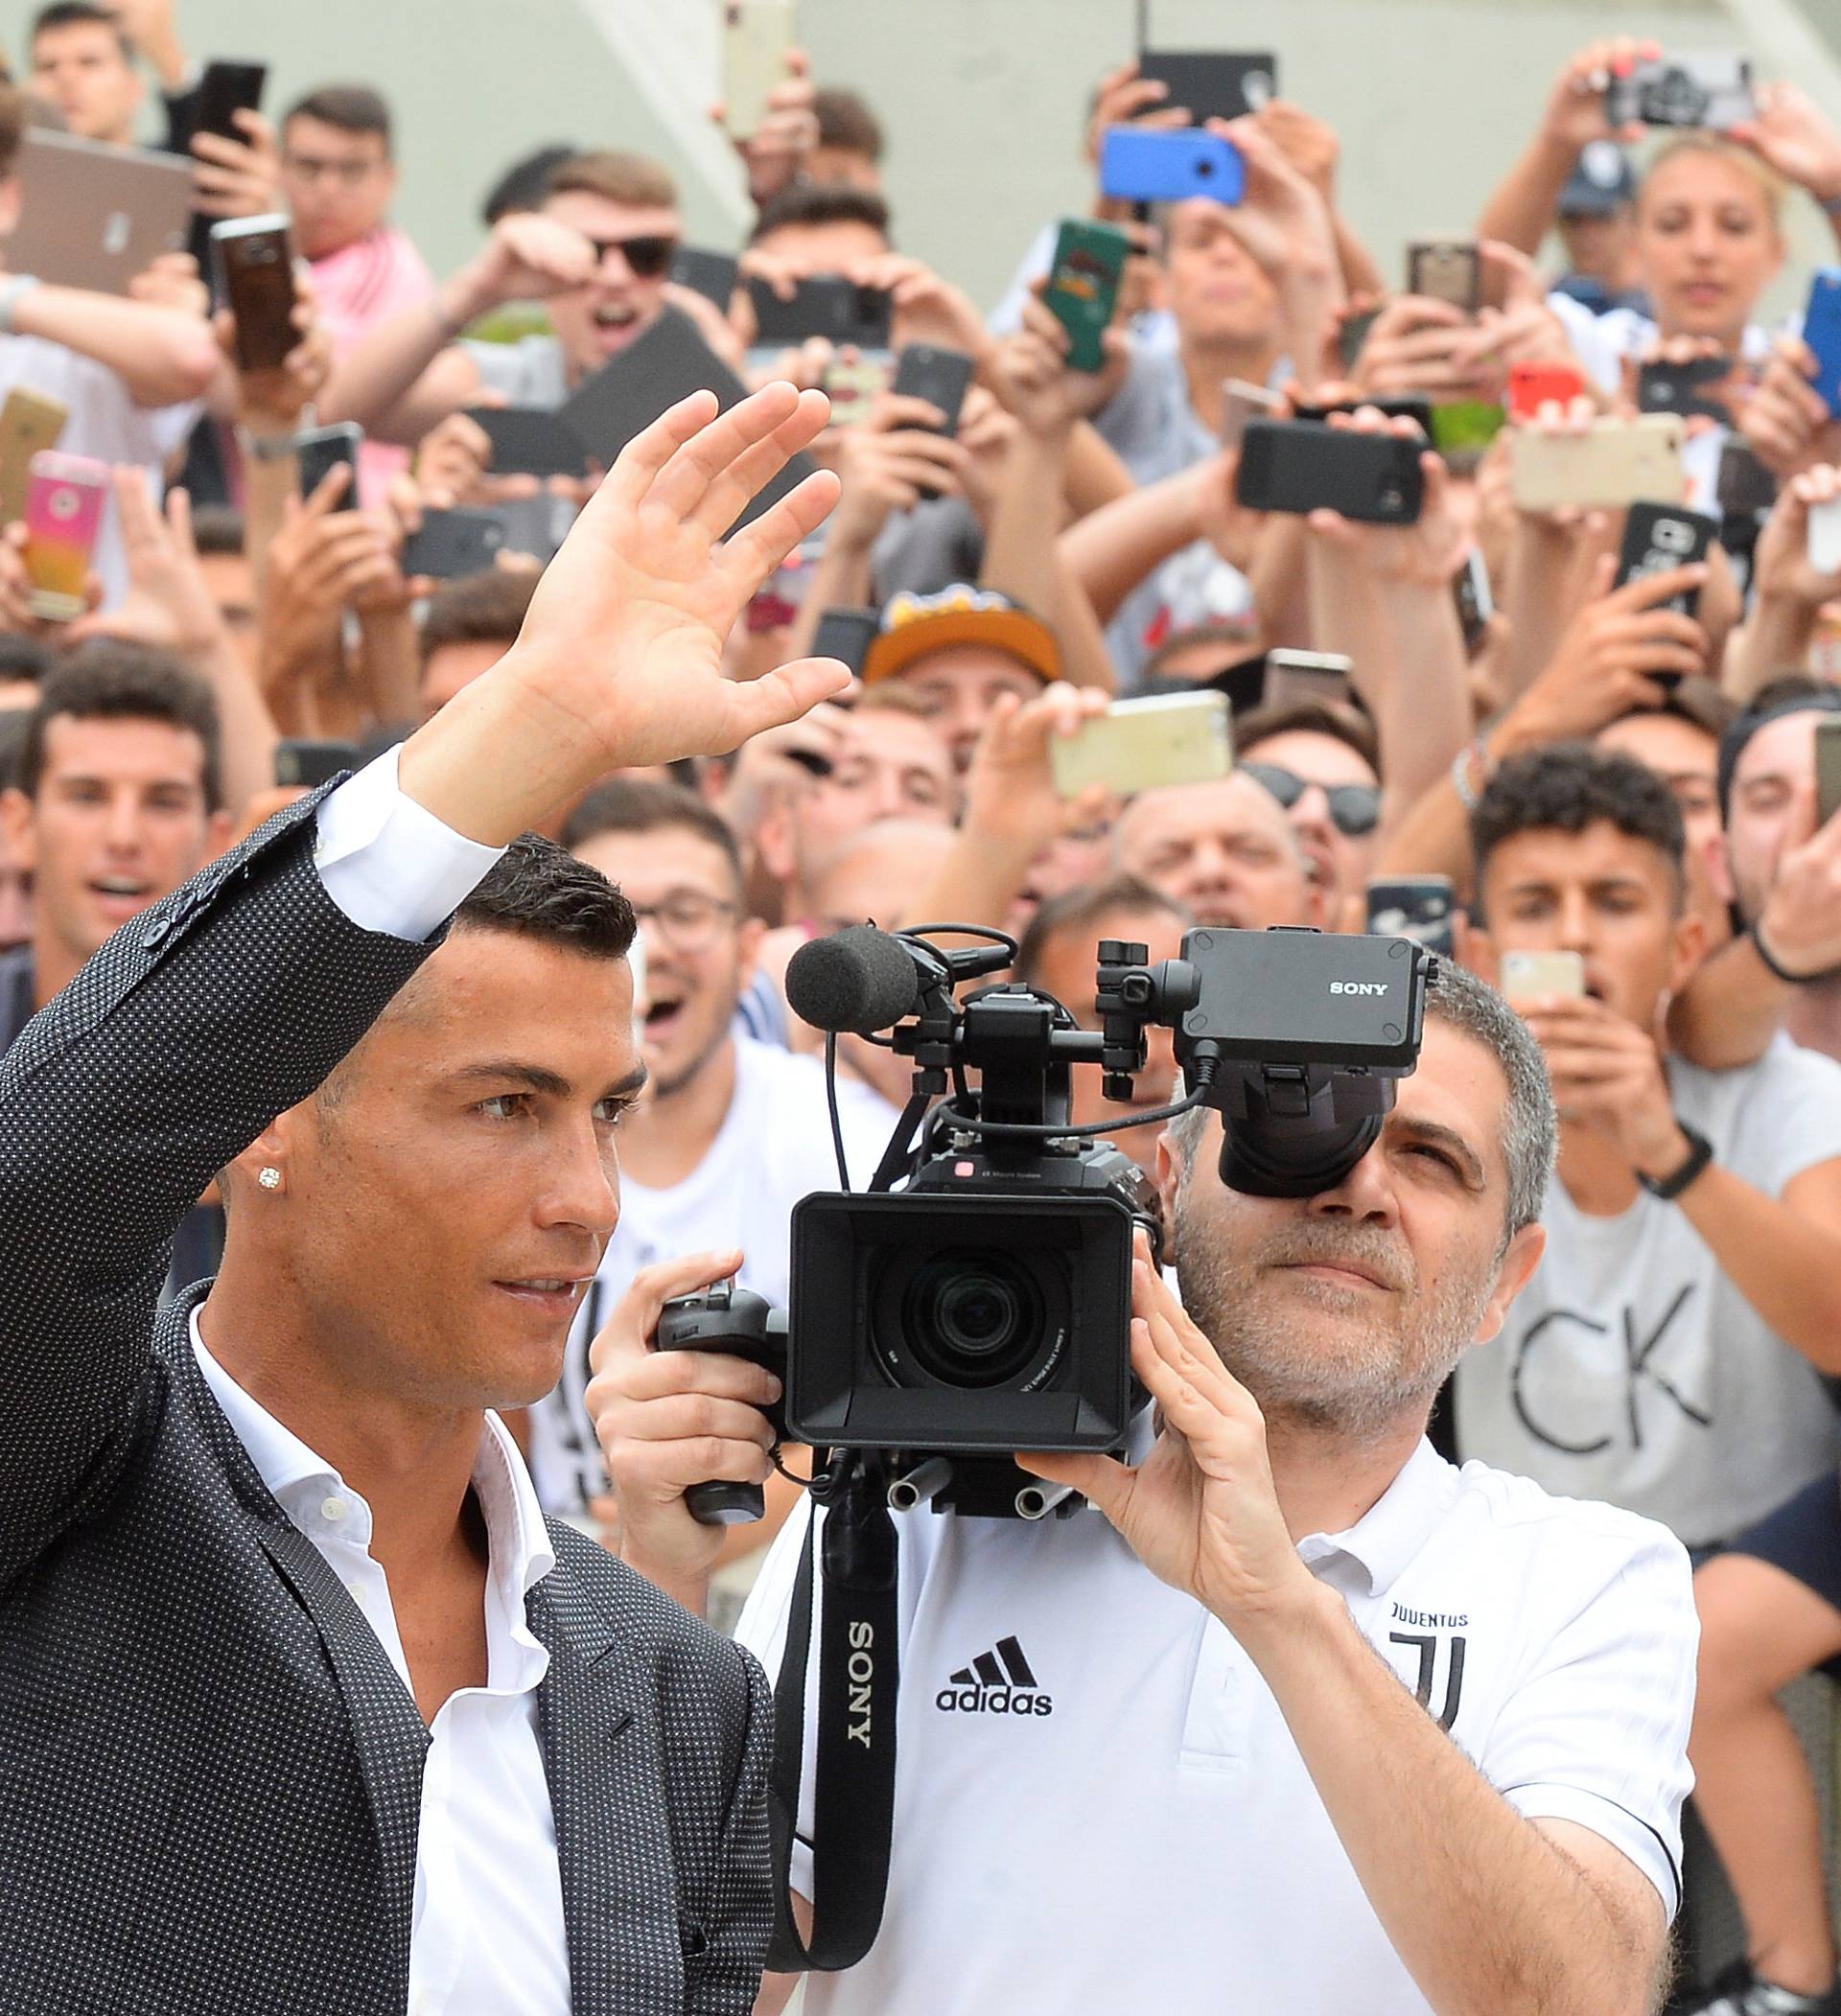 Cristiano Ronaldo waves as he arrives at the Juventus' medical center in Turin